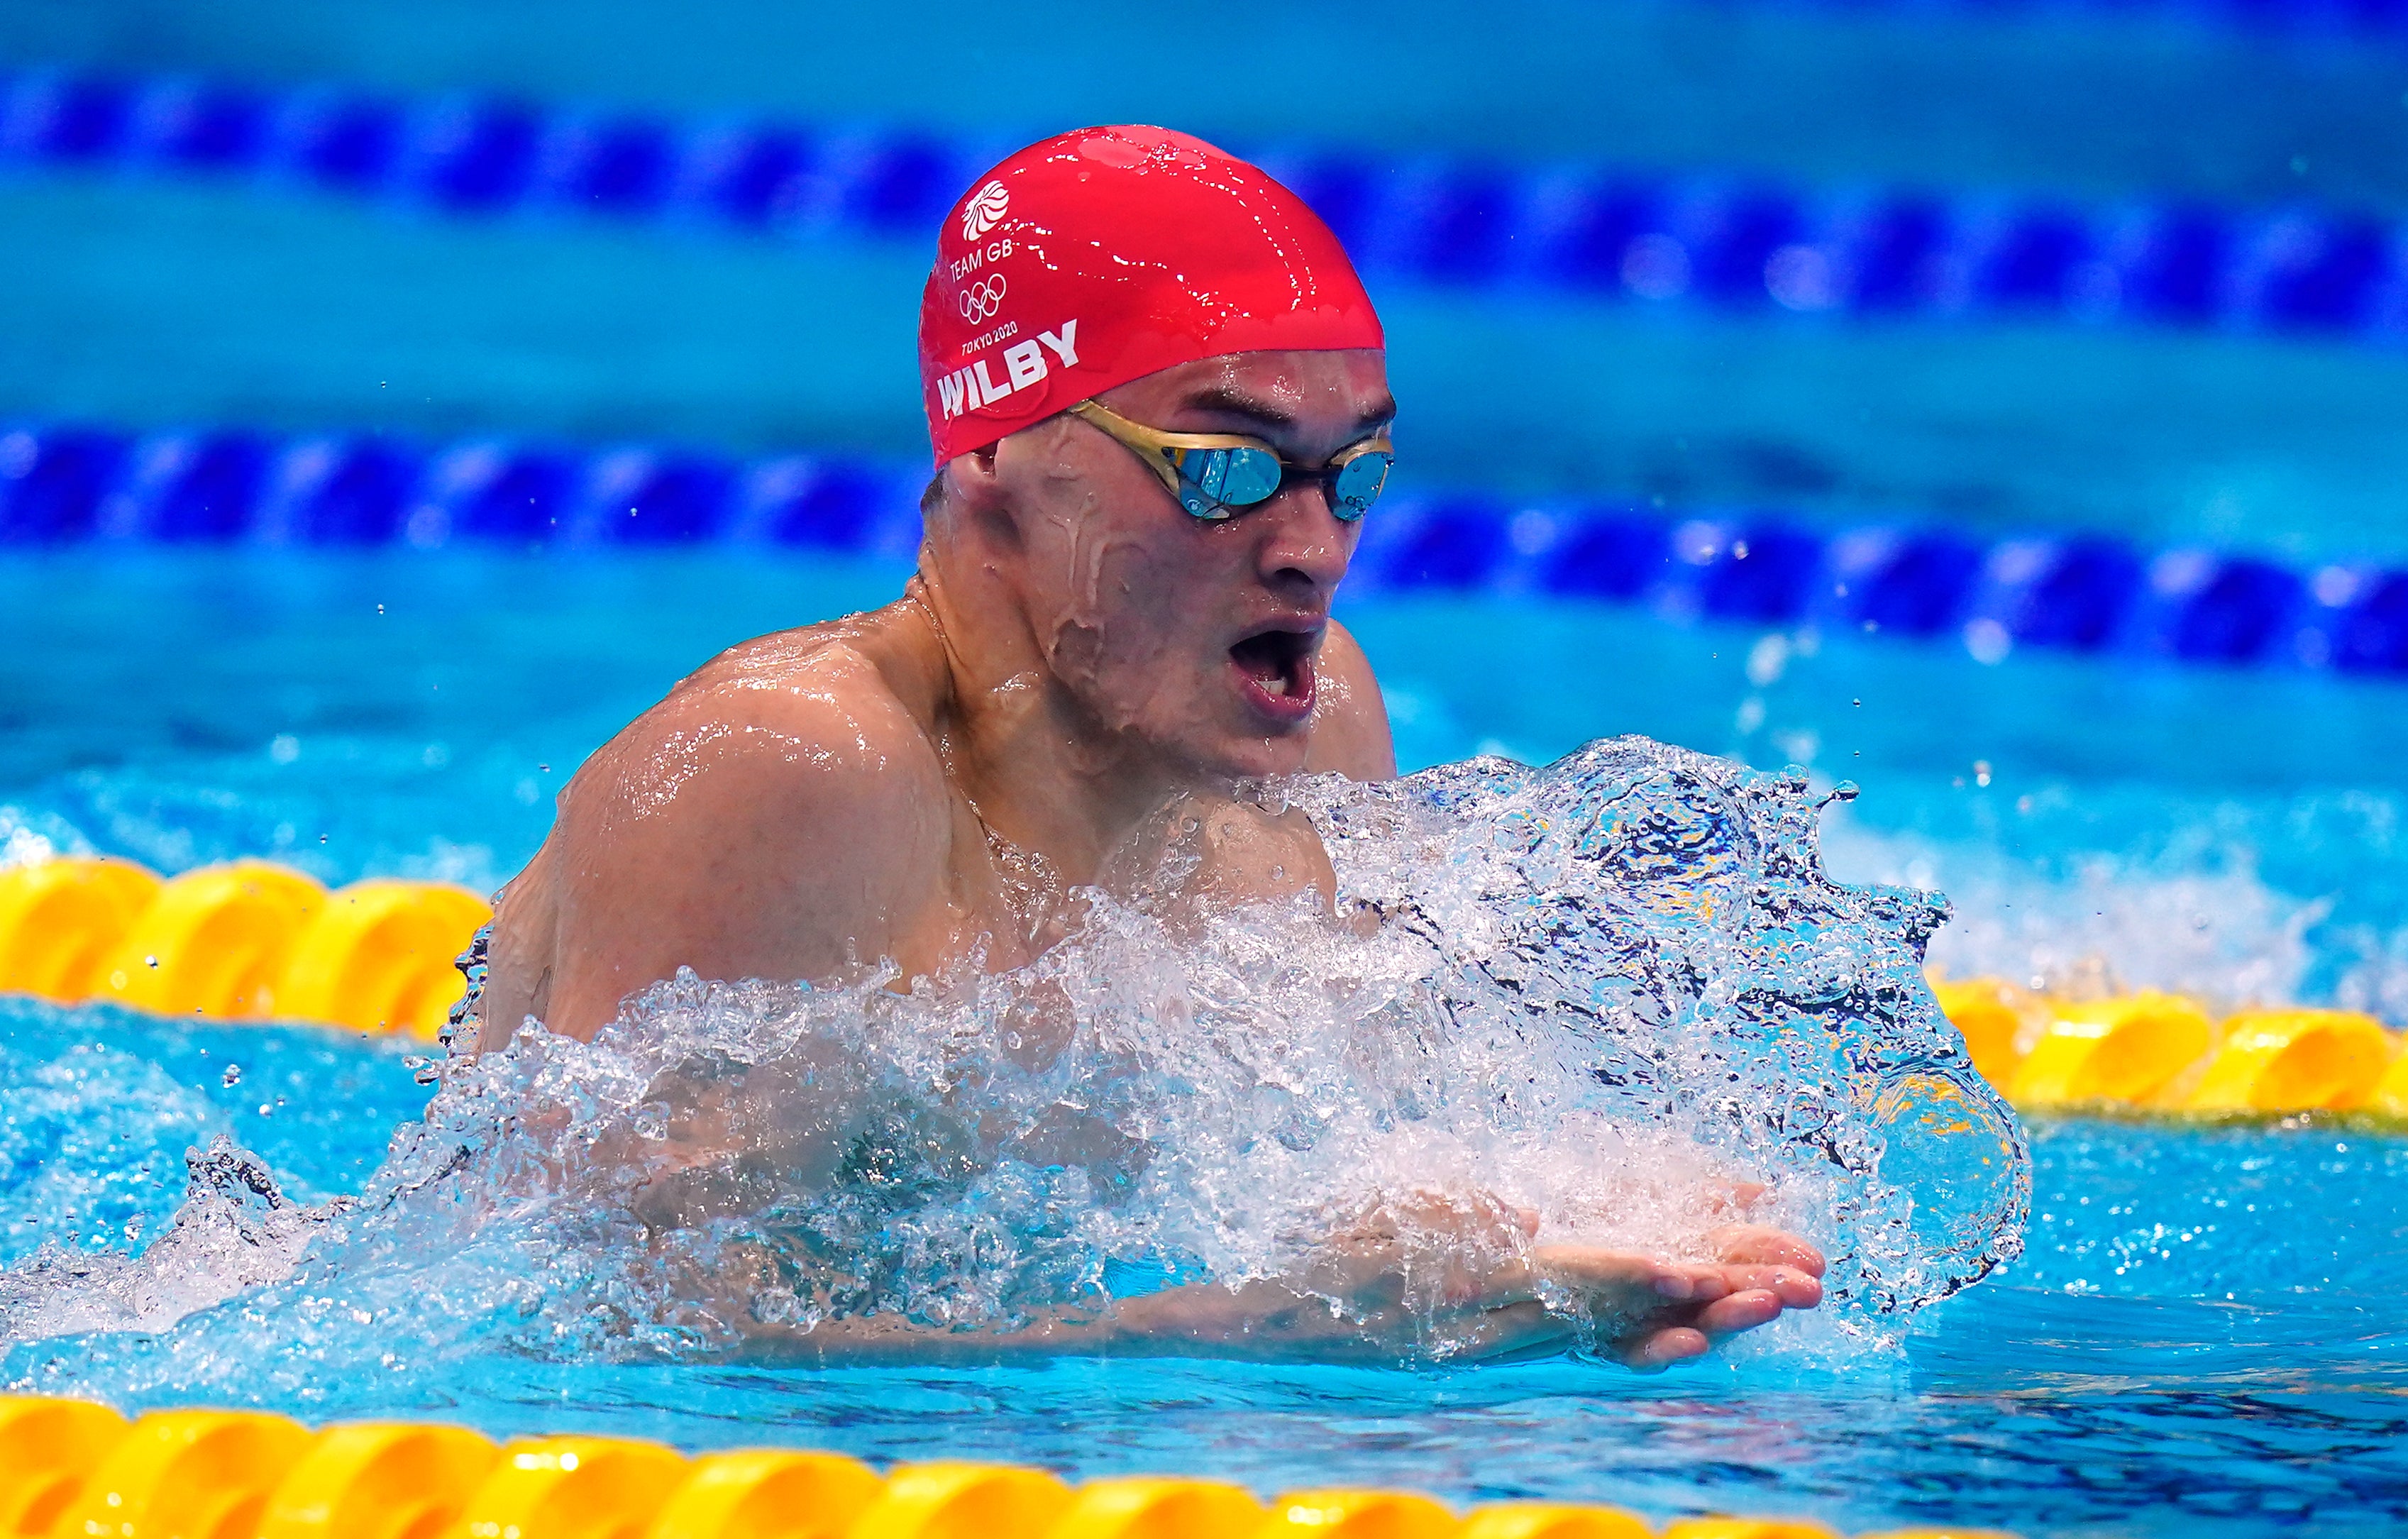 James Wilby made a promising start to the men’s 200m breaststroke but faded later on (Adam Davy/PA)